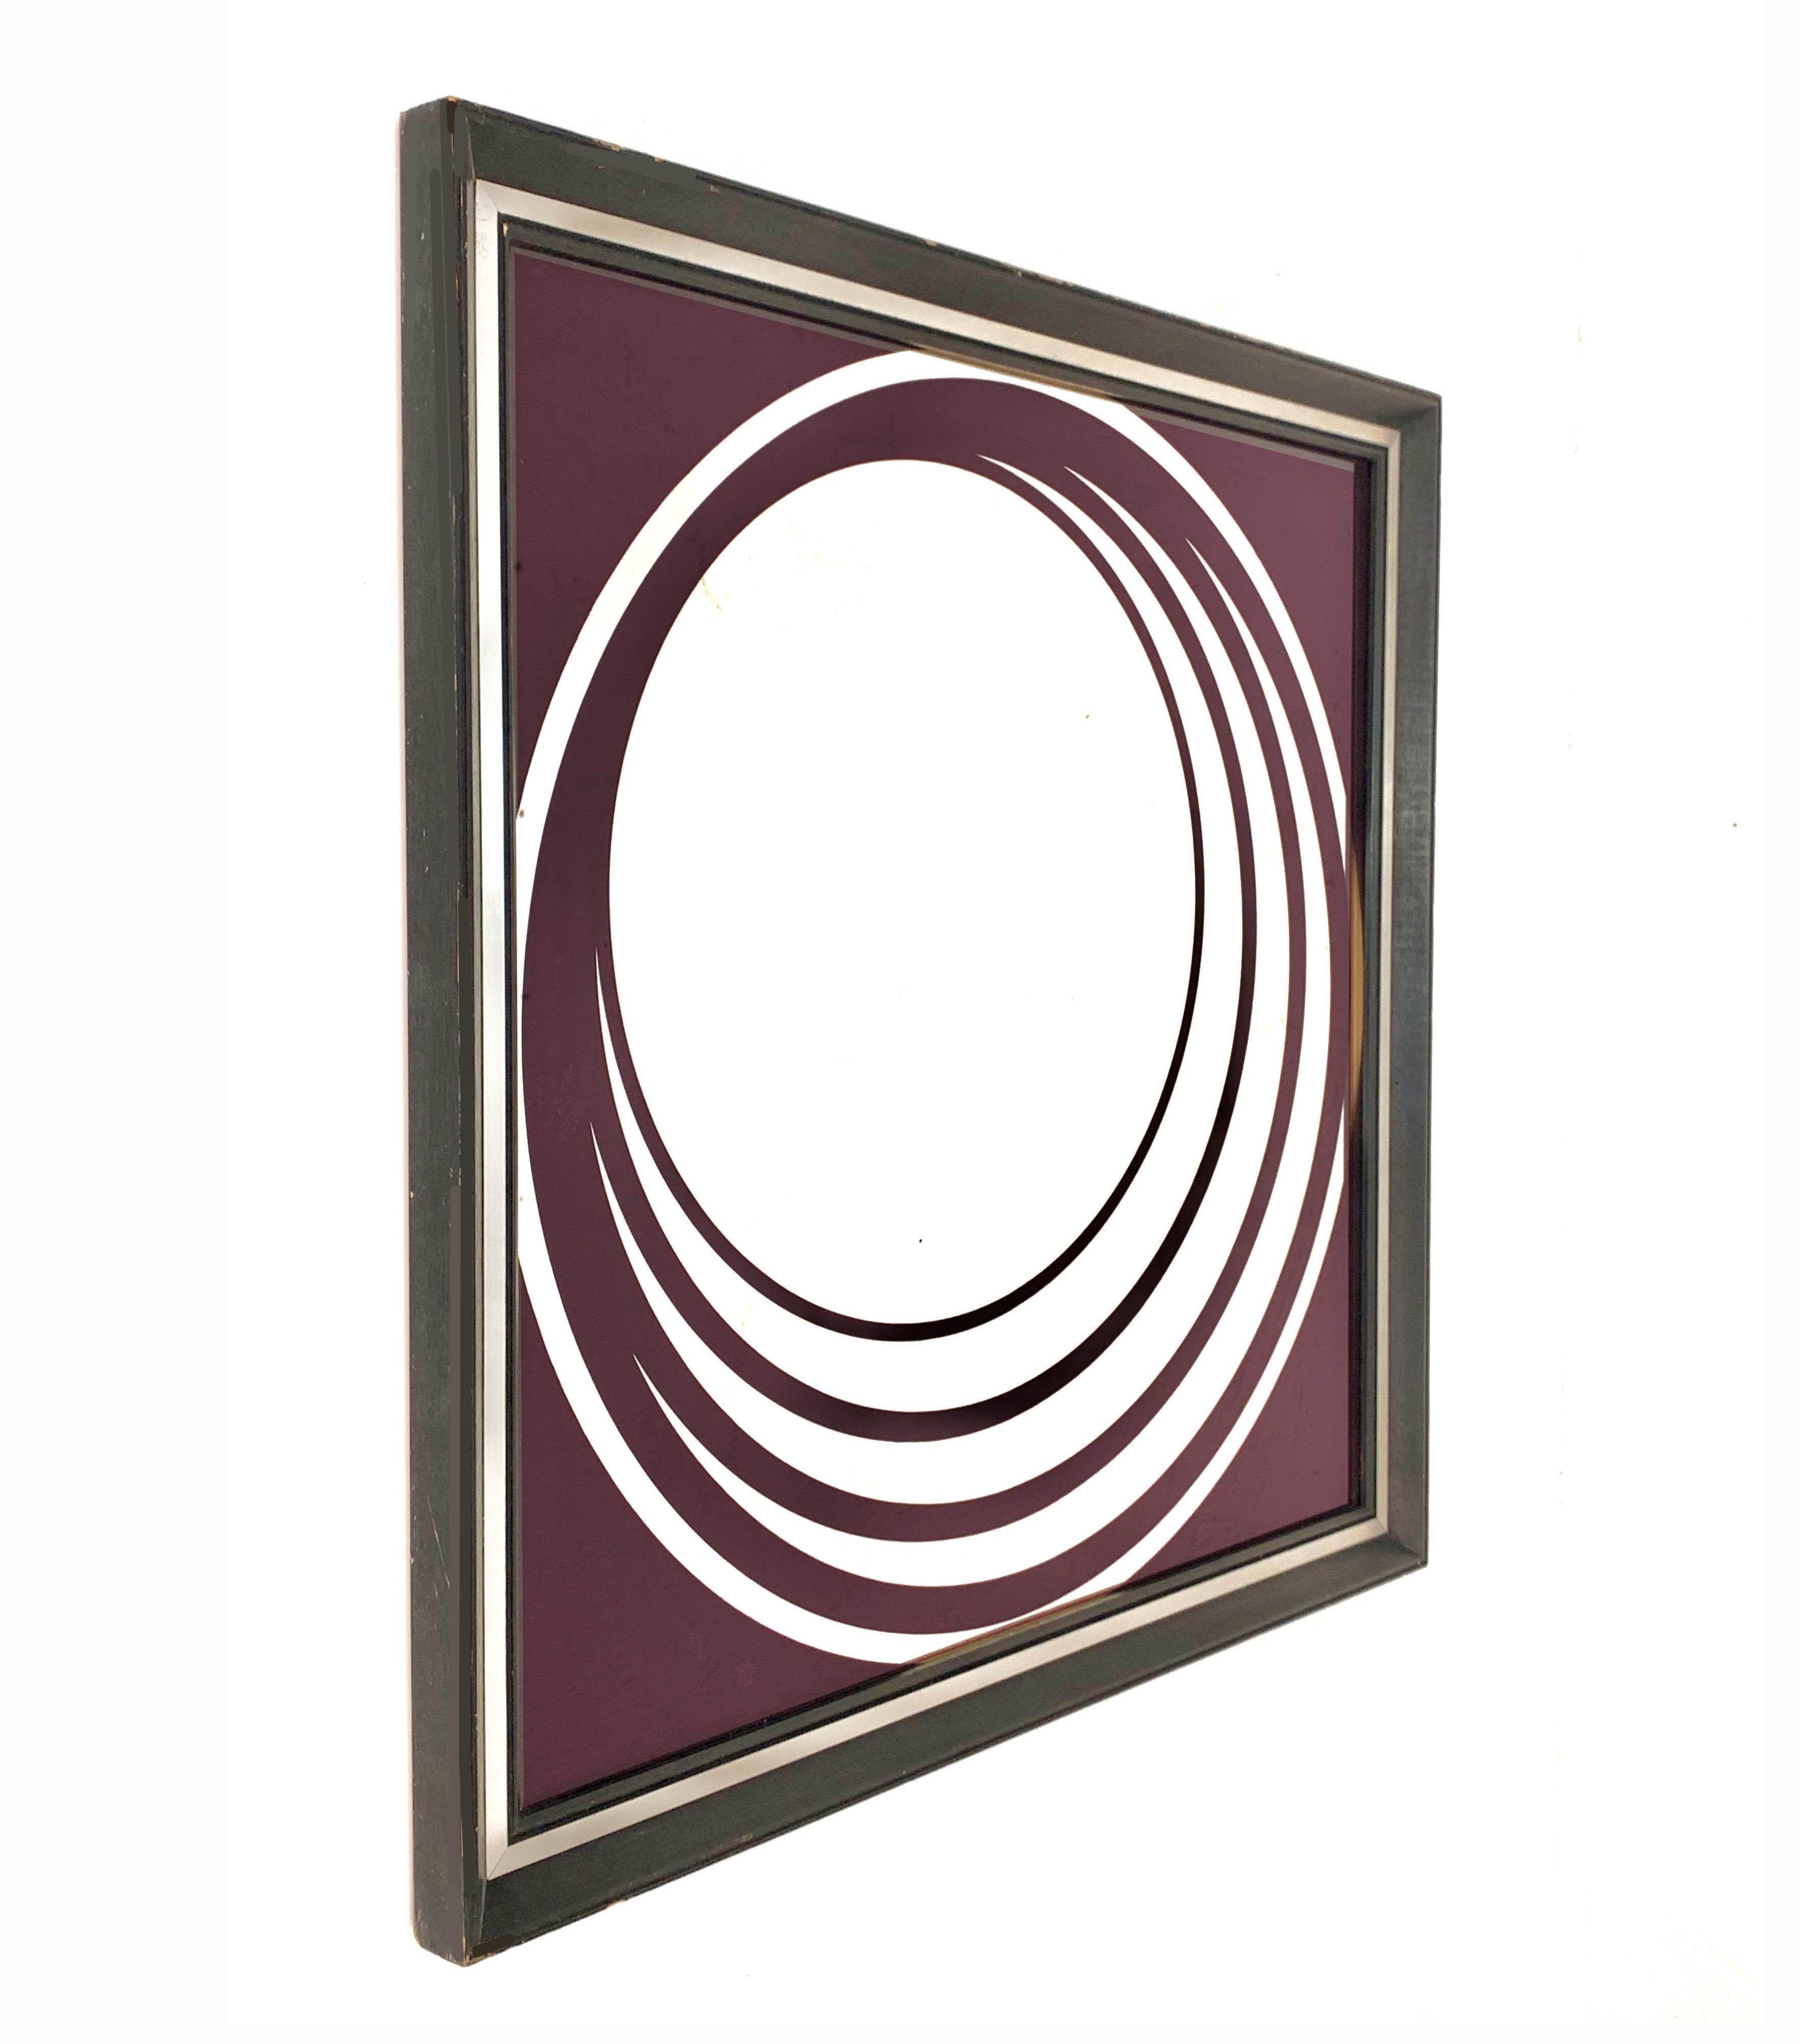 English Midcentury British Burgundy Wall Mirror with Optical Effect after Verner Panton